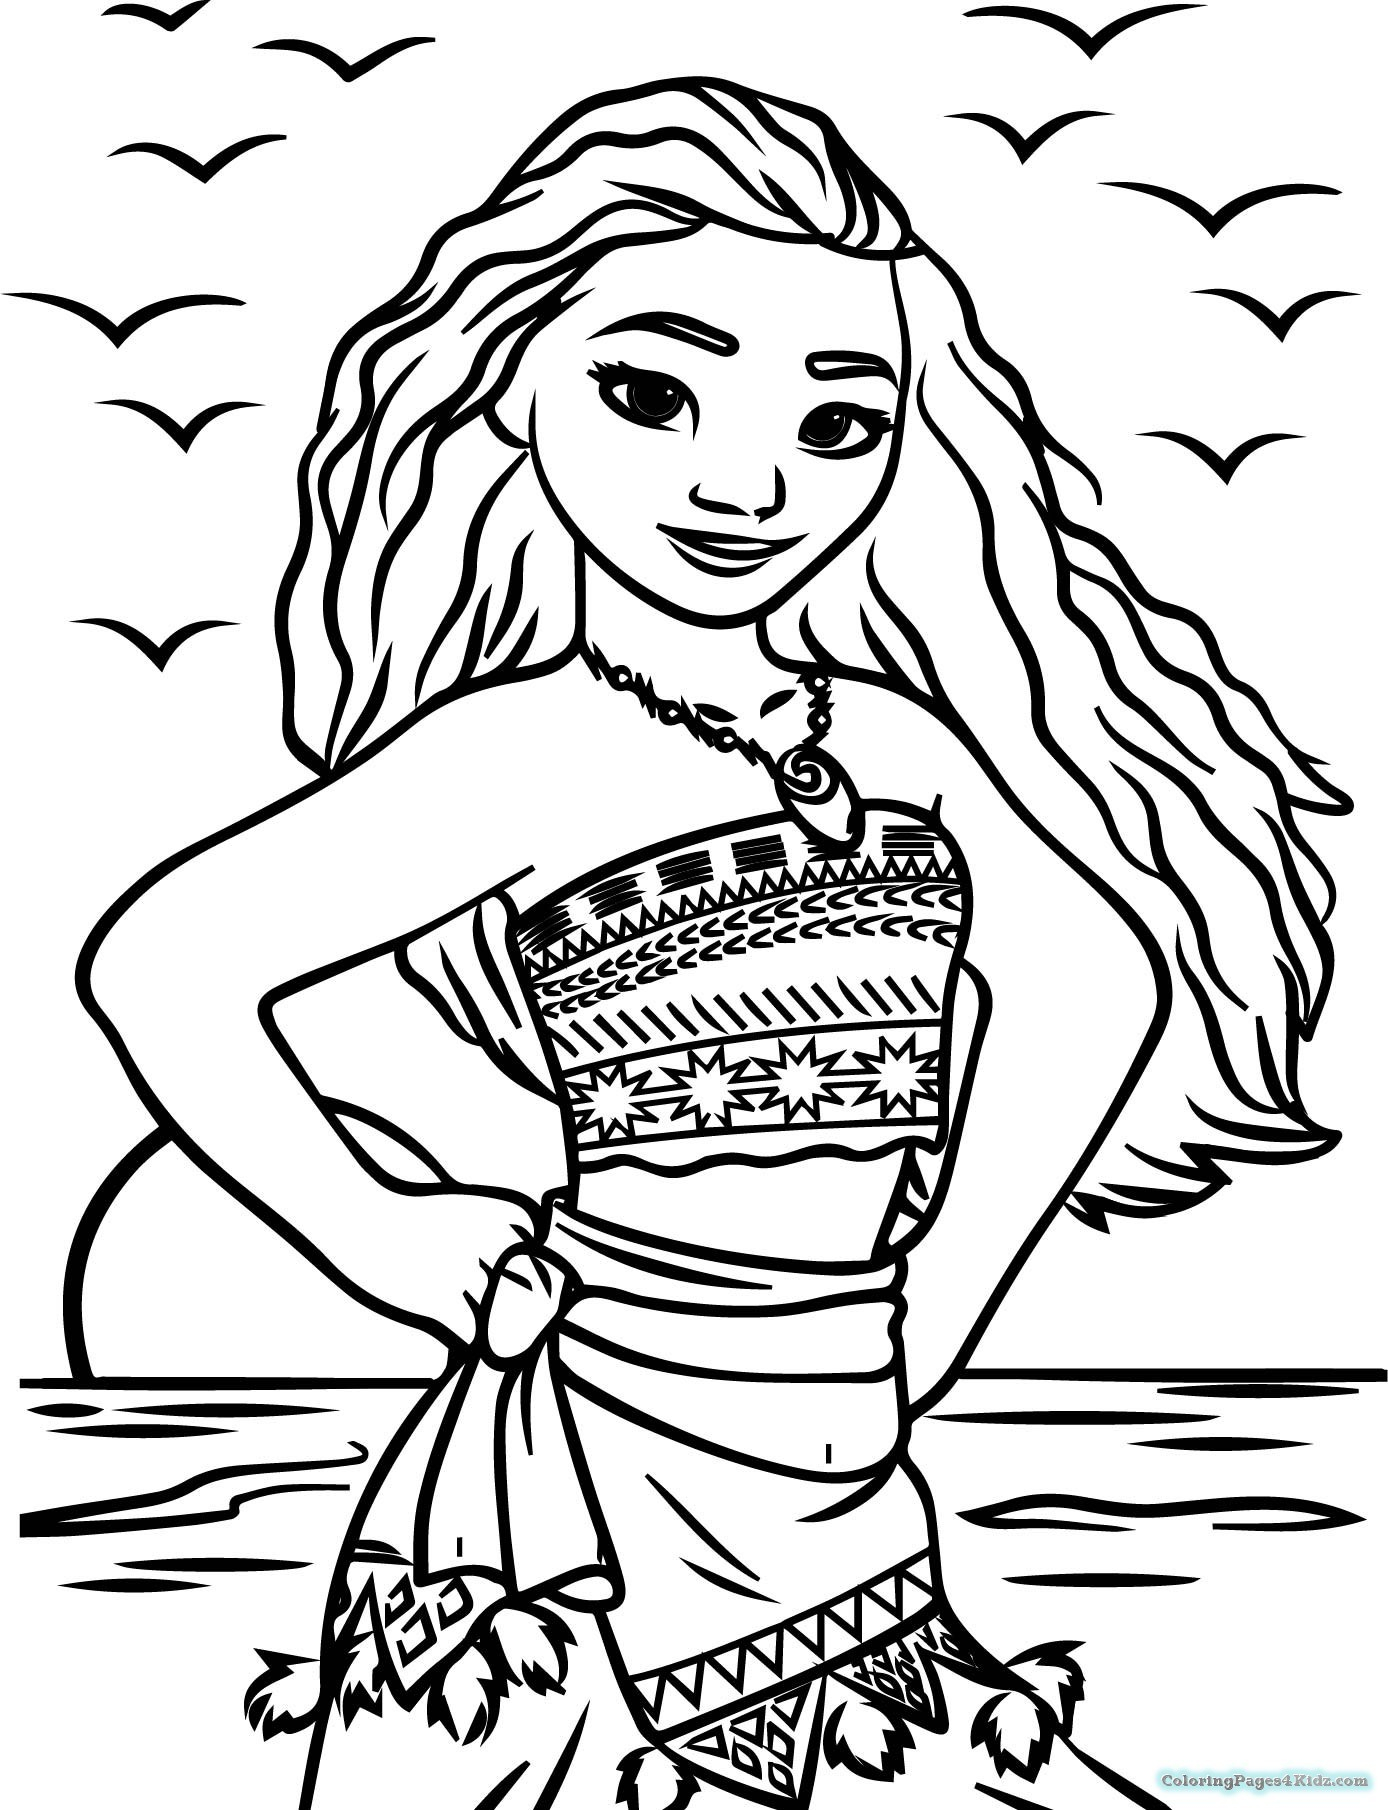 Coloring Pages For Girls Frozen Coloring Book Printable Coloring Sheets For Girls Frozen Games